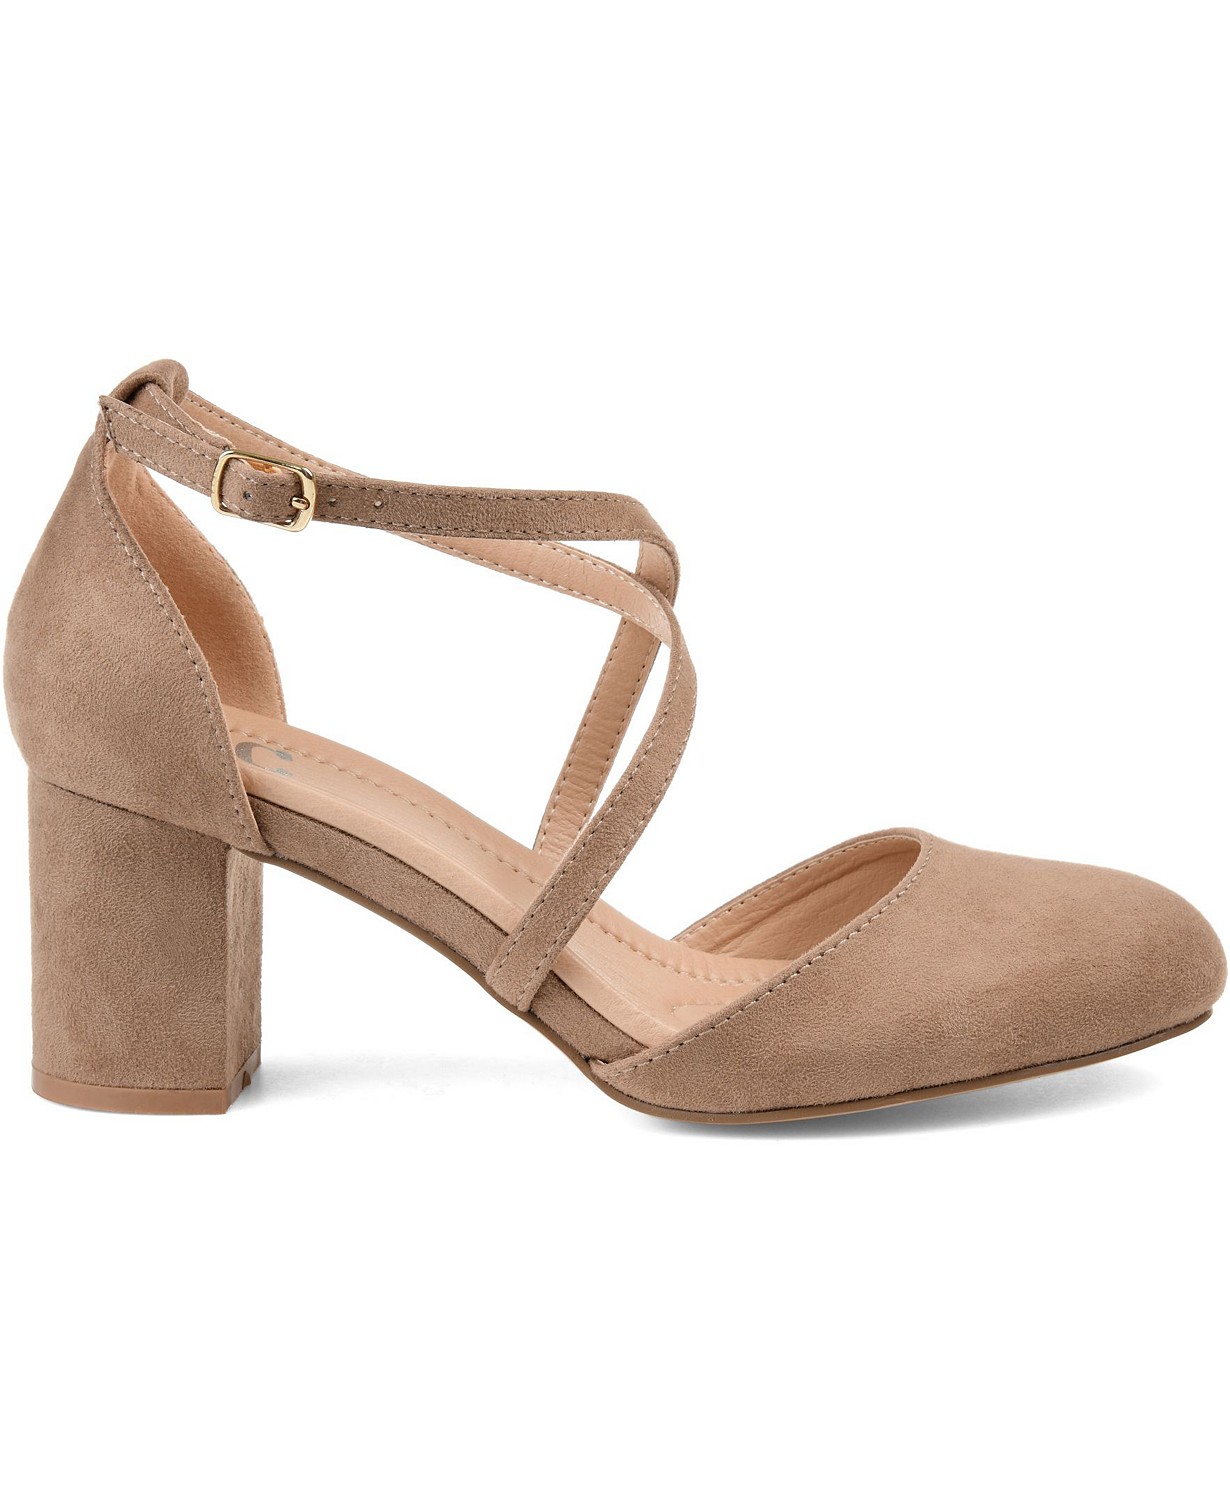 www.couturepoint.com-journee-collection-womens-beige-foster-pumps